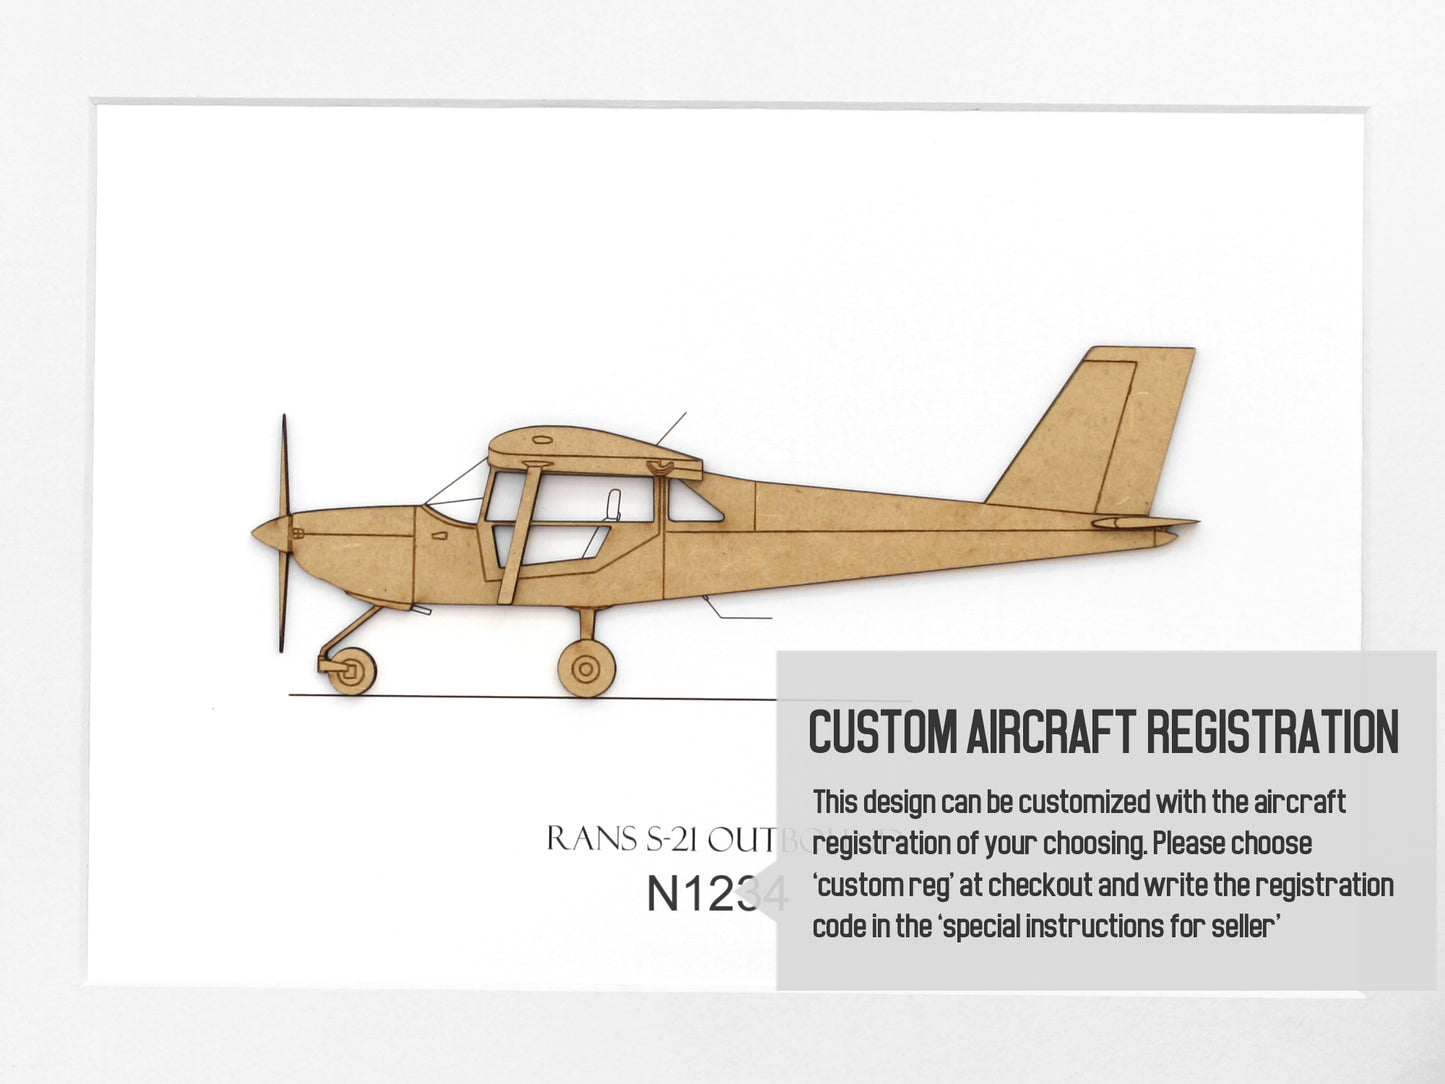 Rans S-21 Outbound aviation gifts